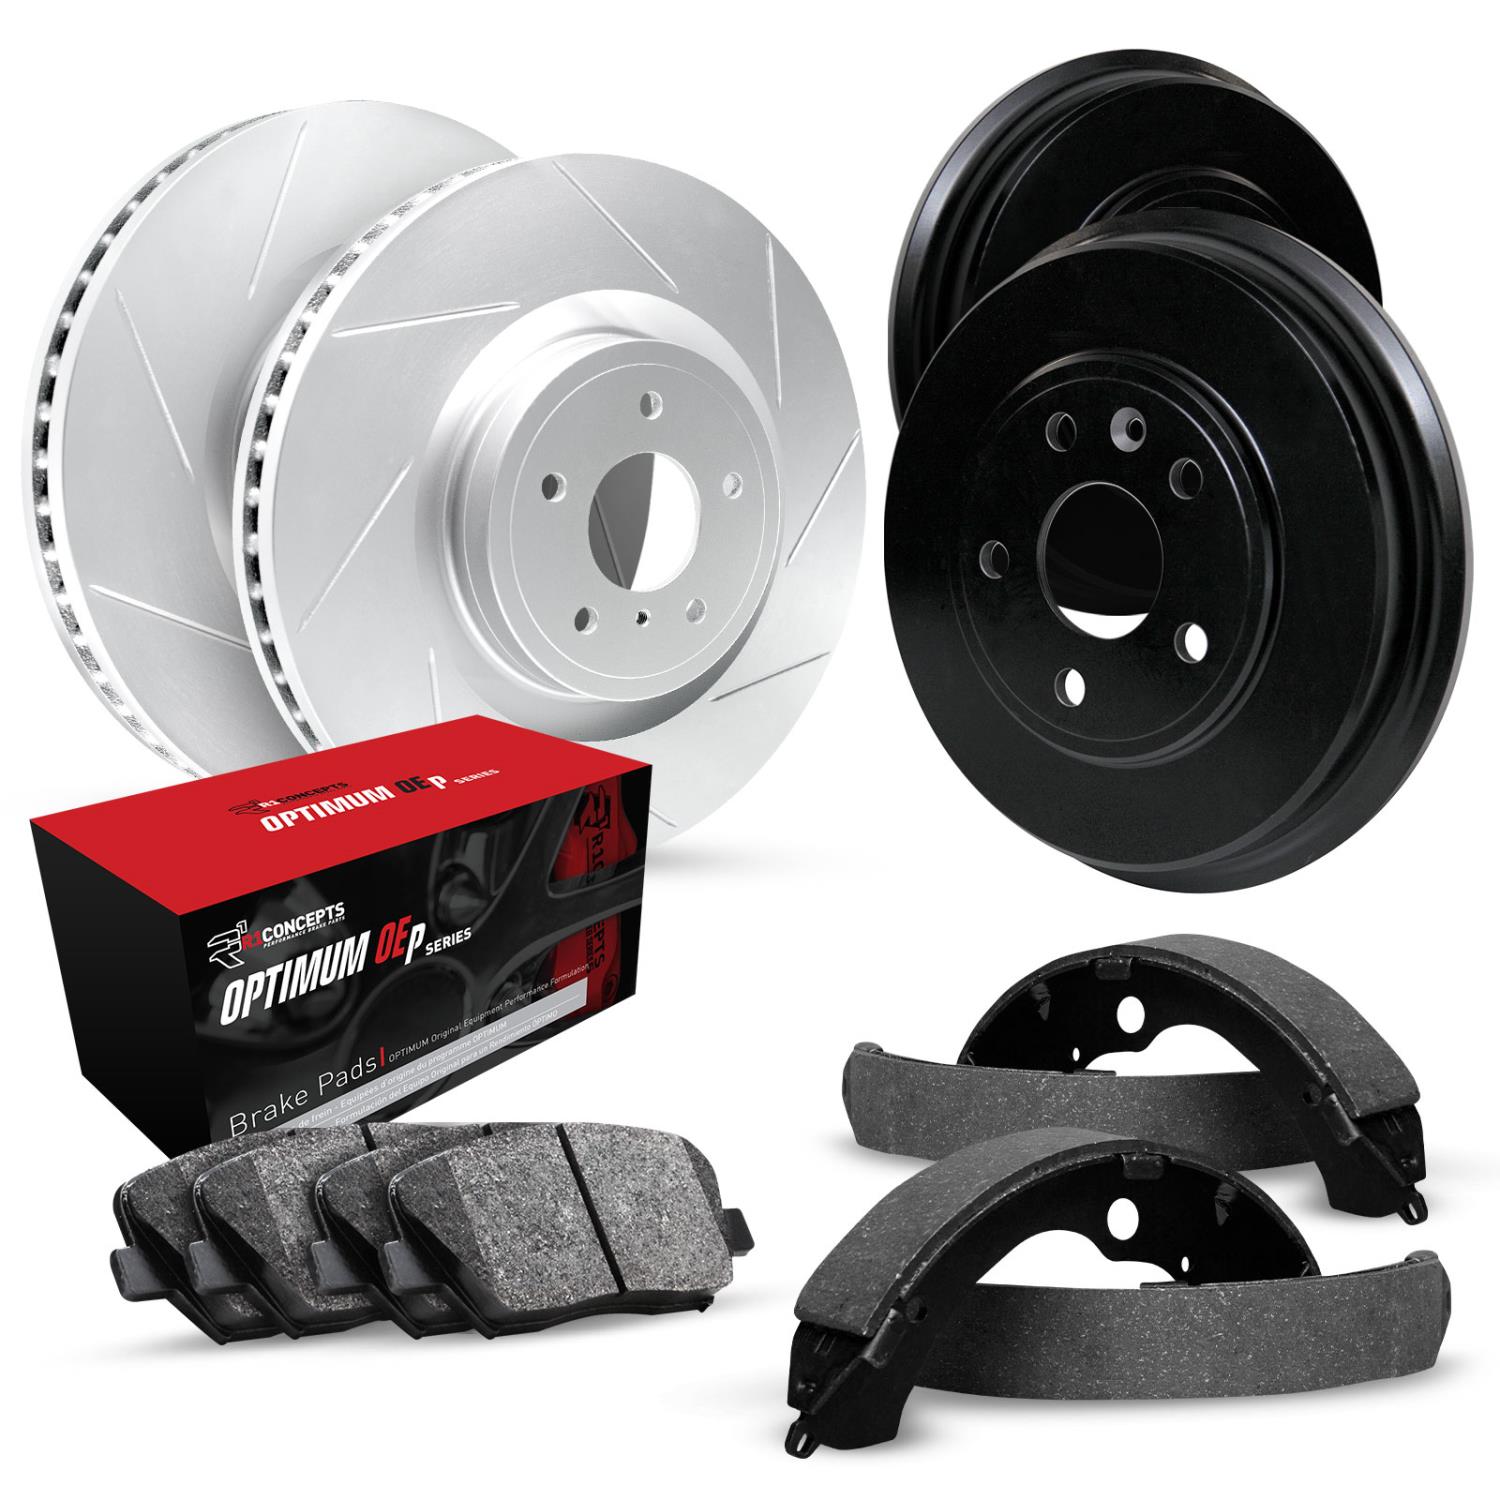 GEO-Carbon Slotted Brake Rotor & Drum Set w/Optimum OE Pads & Shoes, 1969-1974 GM, Position: Front & Rear